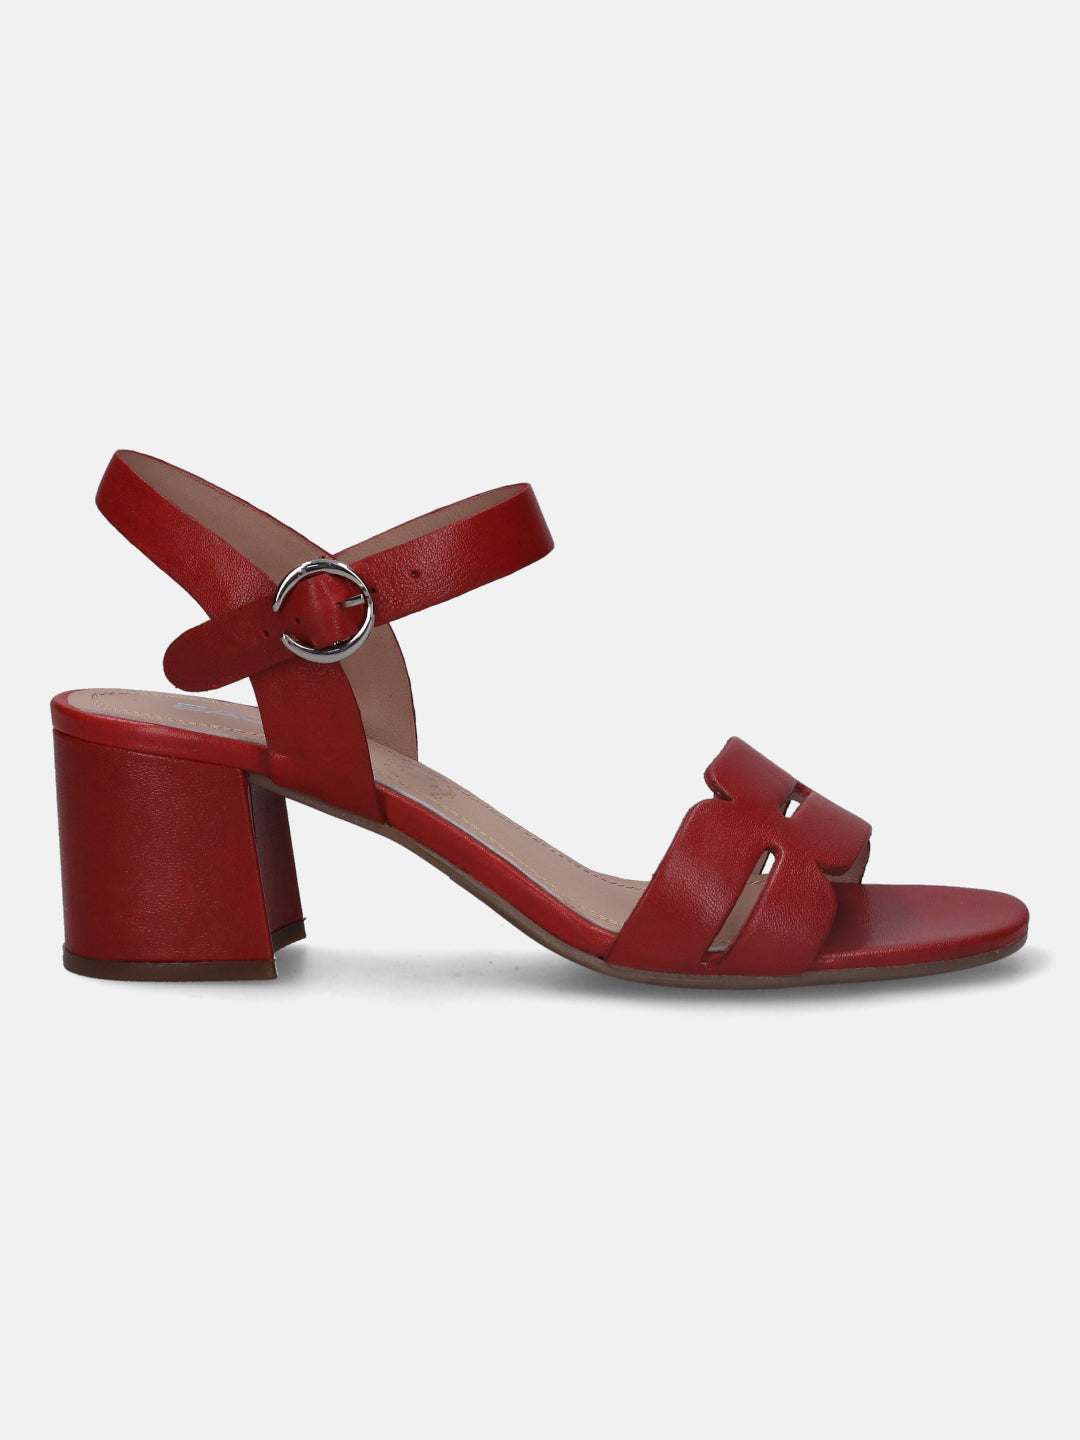 AUGE ankle strap Red heels suede